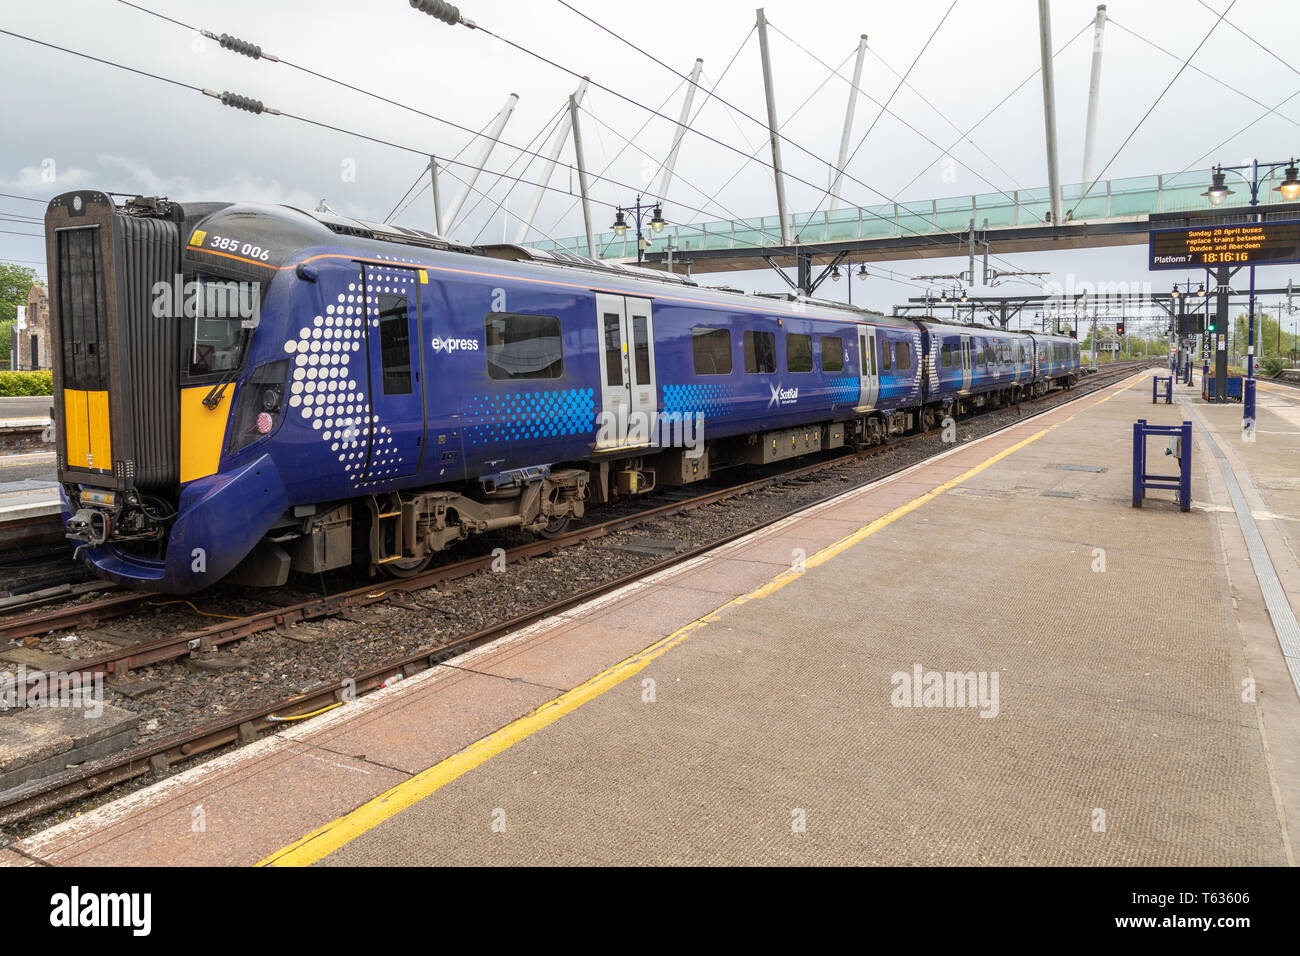 A Scotrail Class 385 electric train stands at Stirling Station. Following completion of electrification work trains of this type now use this station. Stock Photo